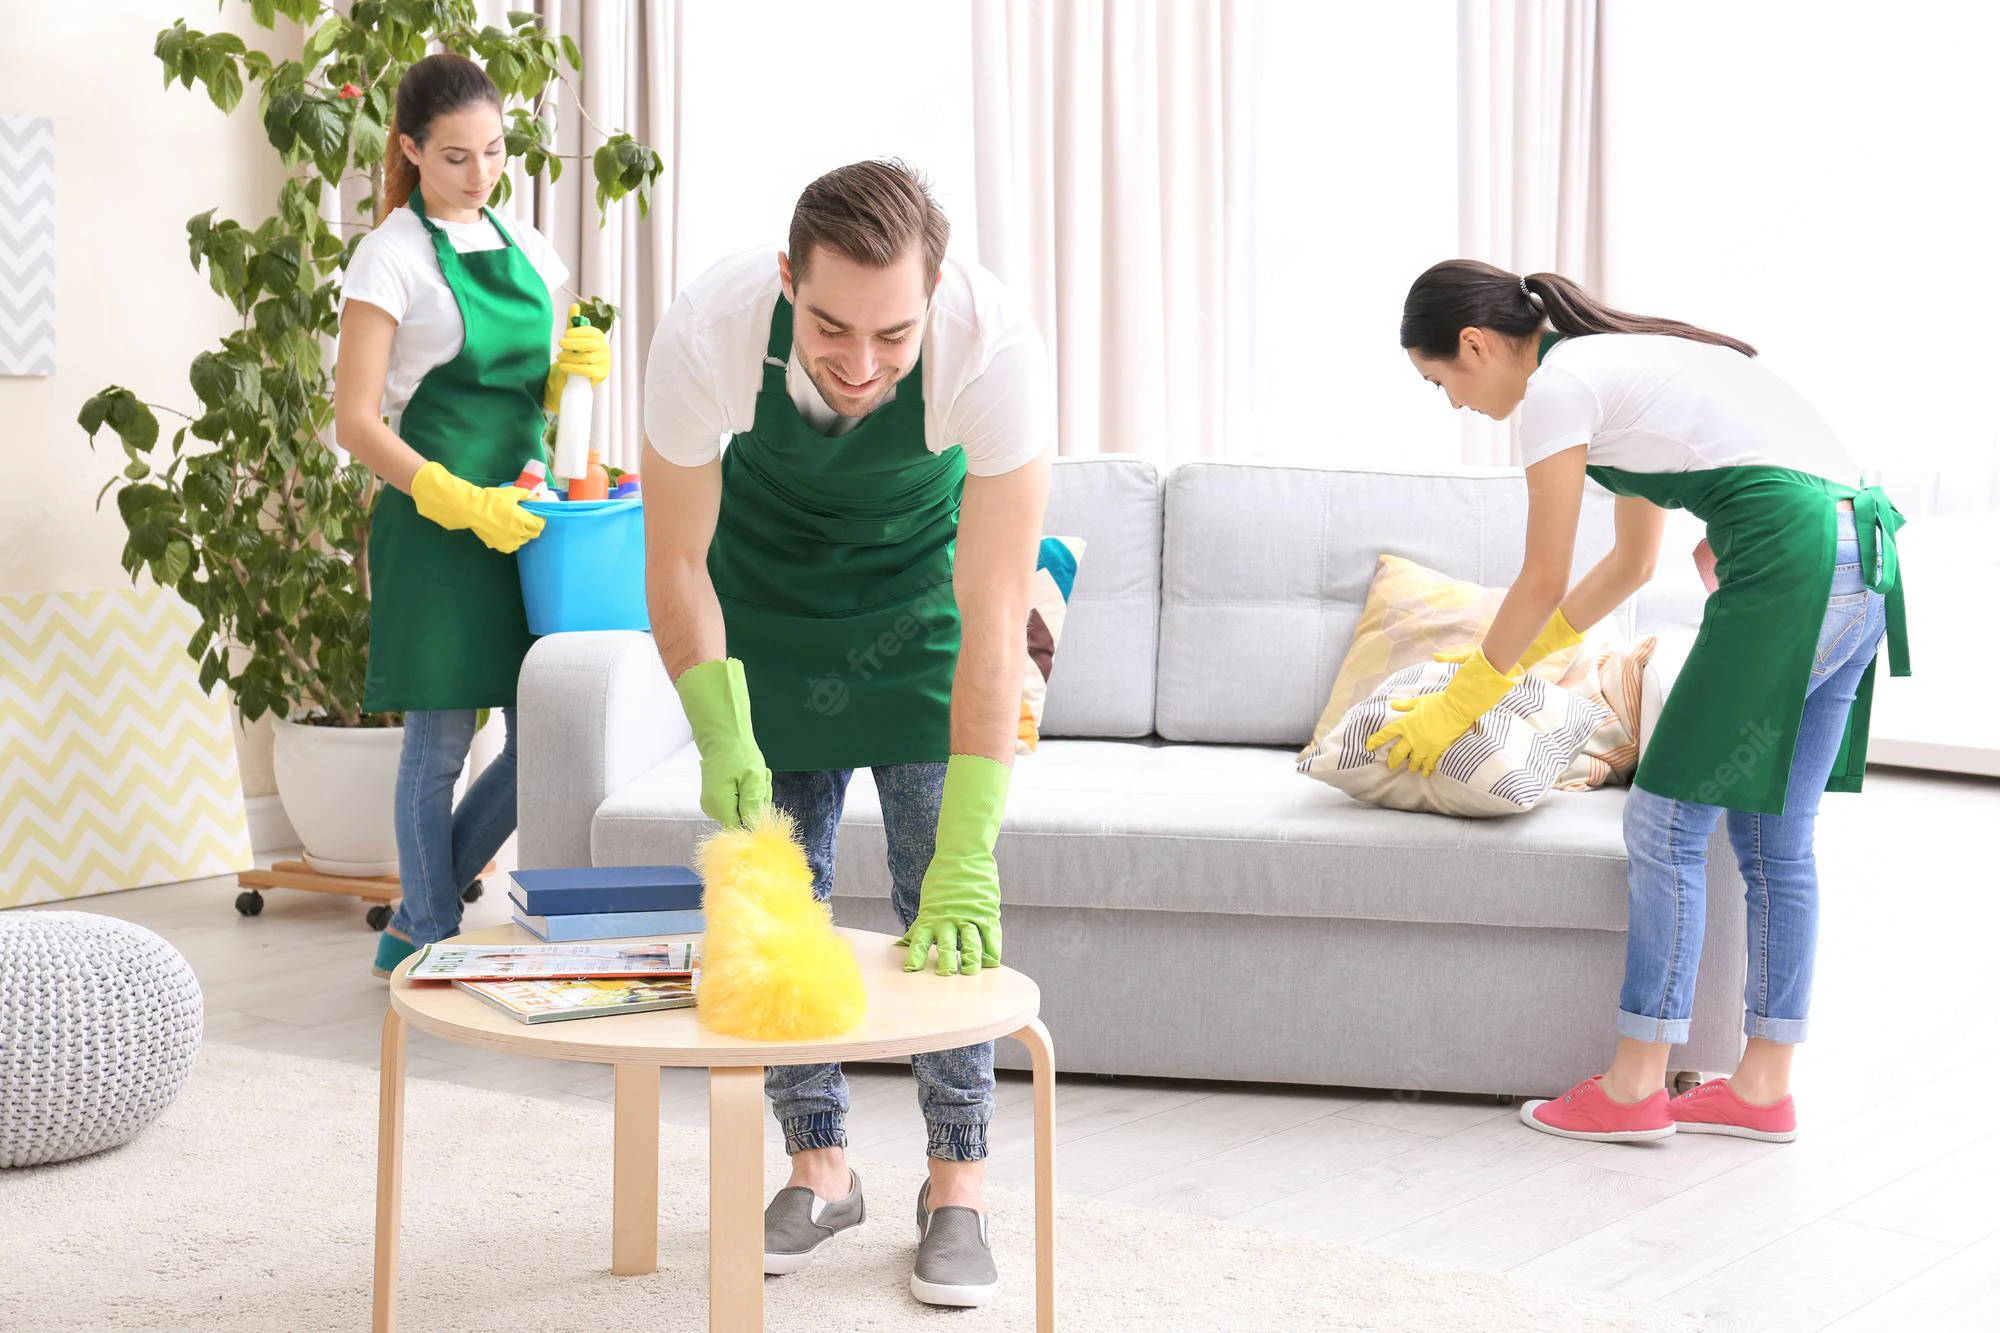 How Professional Cleaning Service Makes Room for Other Activities